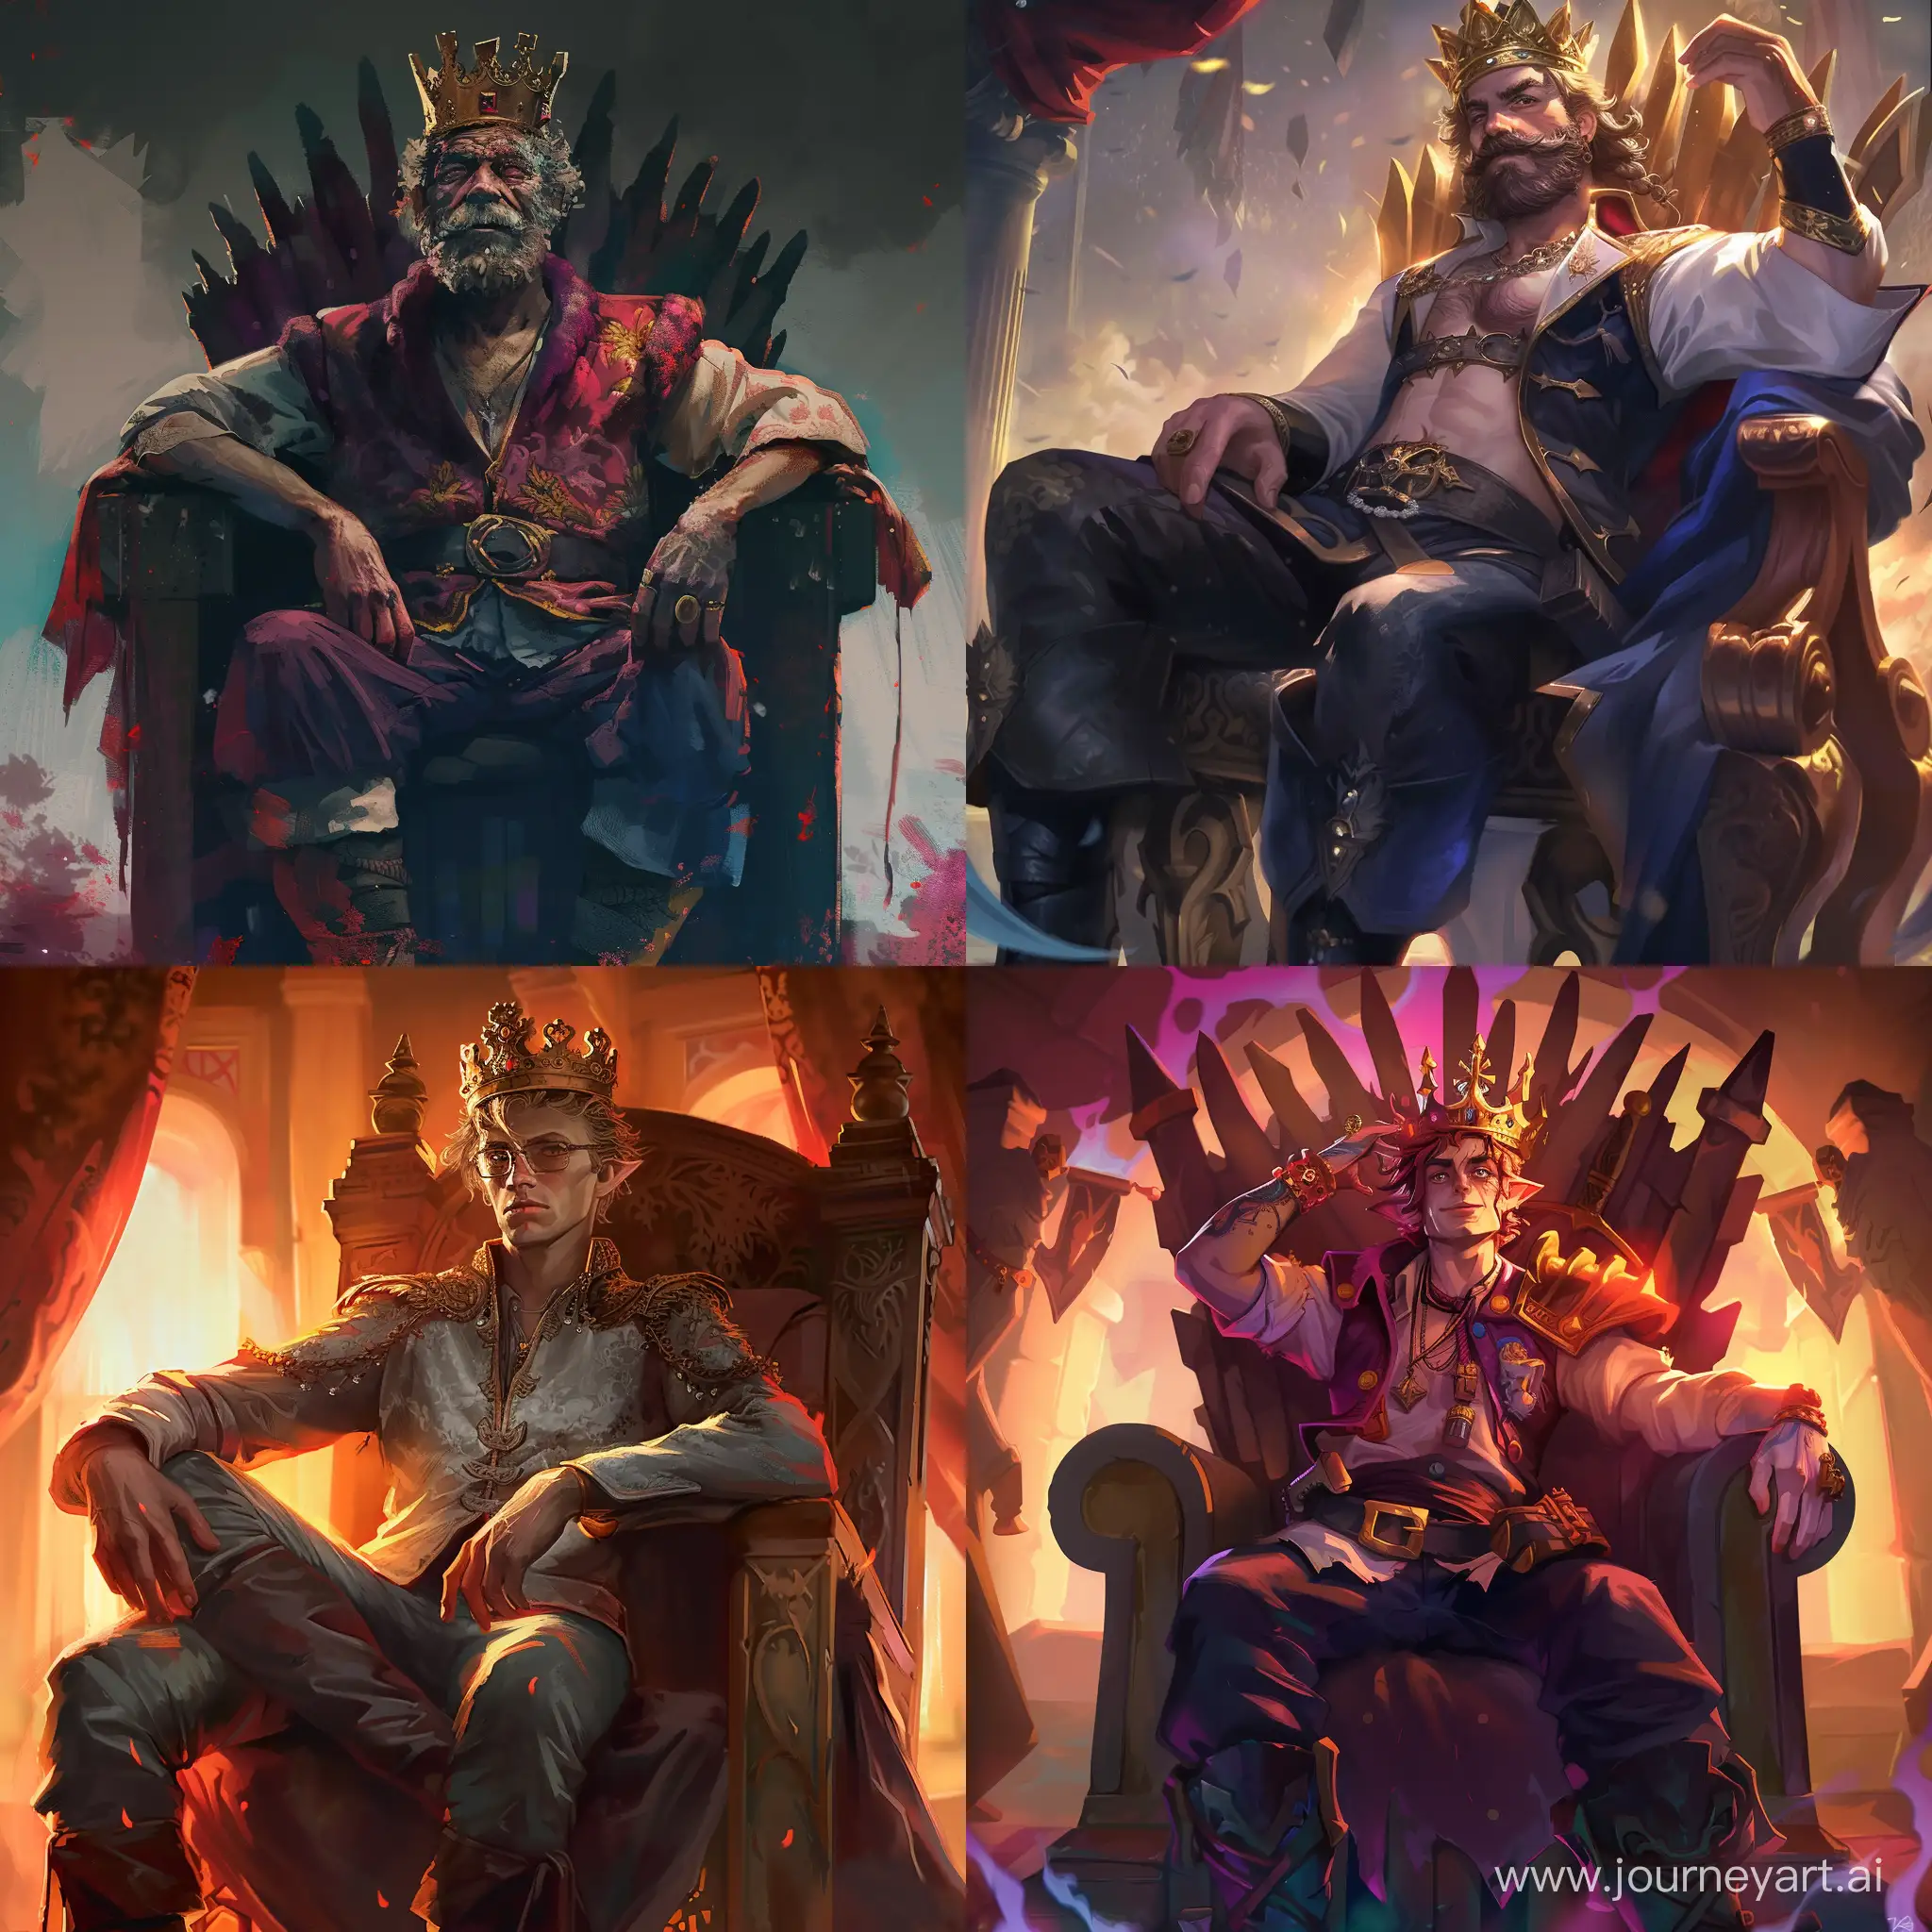 Create an image in which there will be a streamer Mellstroy, who sat on the throne like a king with a crown on his head, in a cool pose.